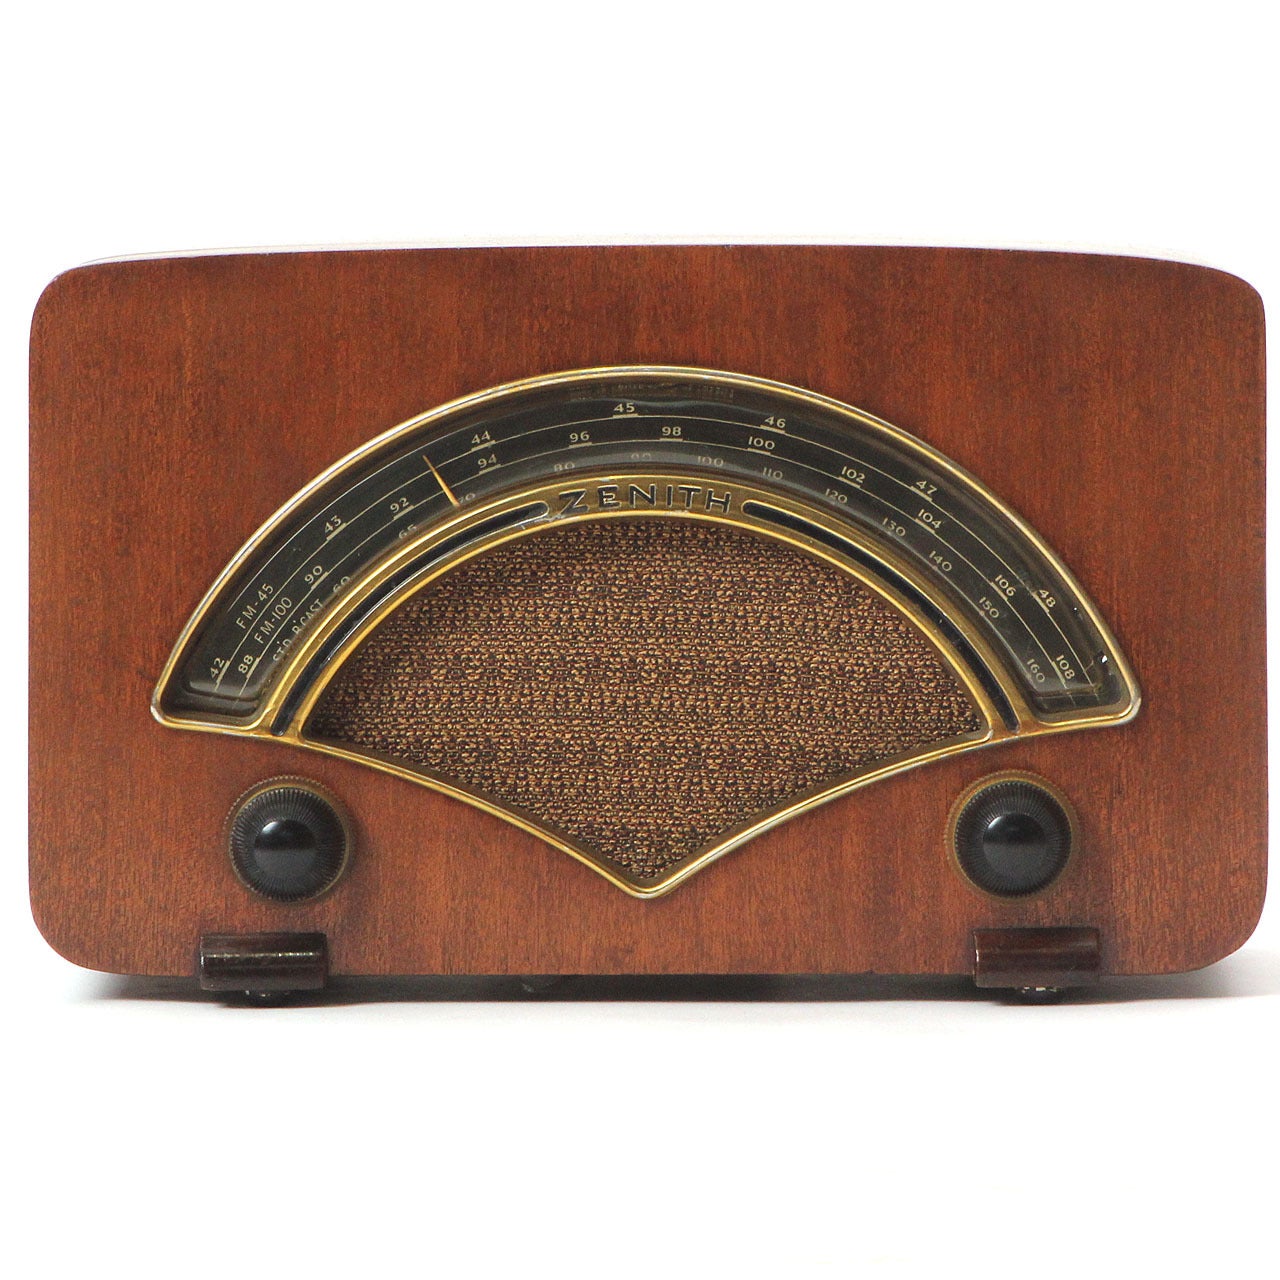 Zenith Radio By Charles And Ray Eames